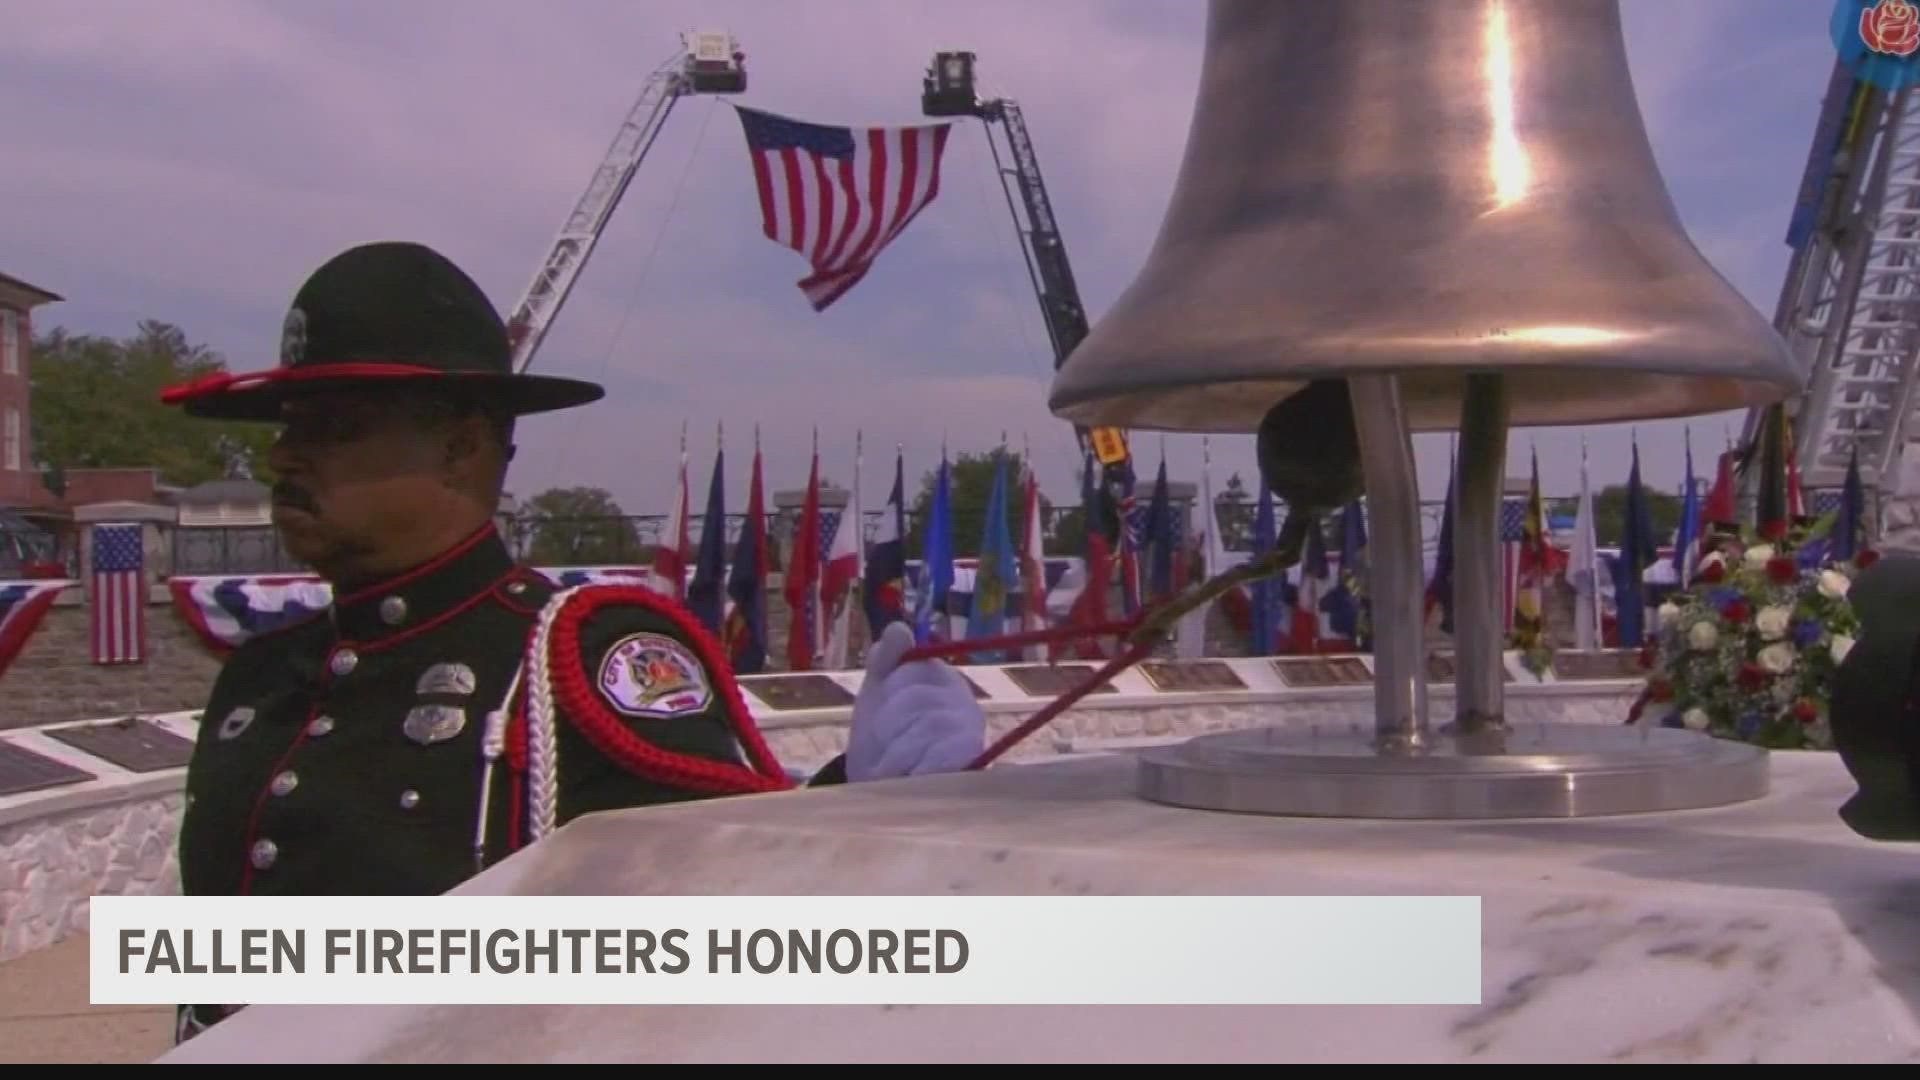 Firefighter families and communities came together in Maryland for the 40th Annual Fallen Firefighters Memorial.